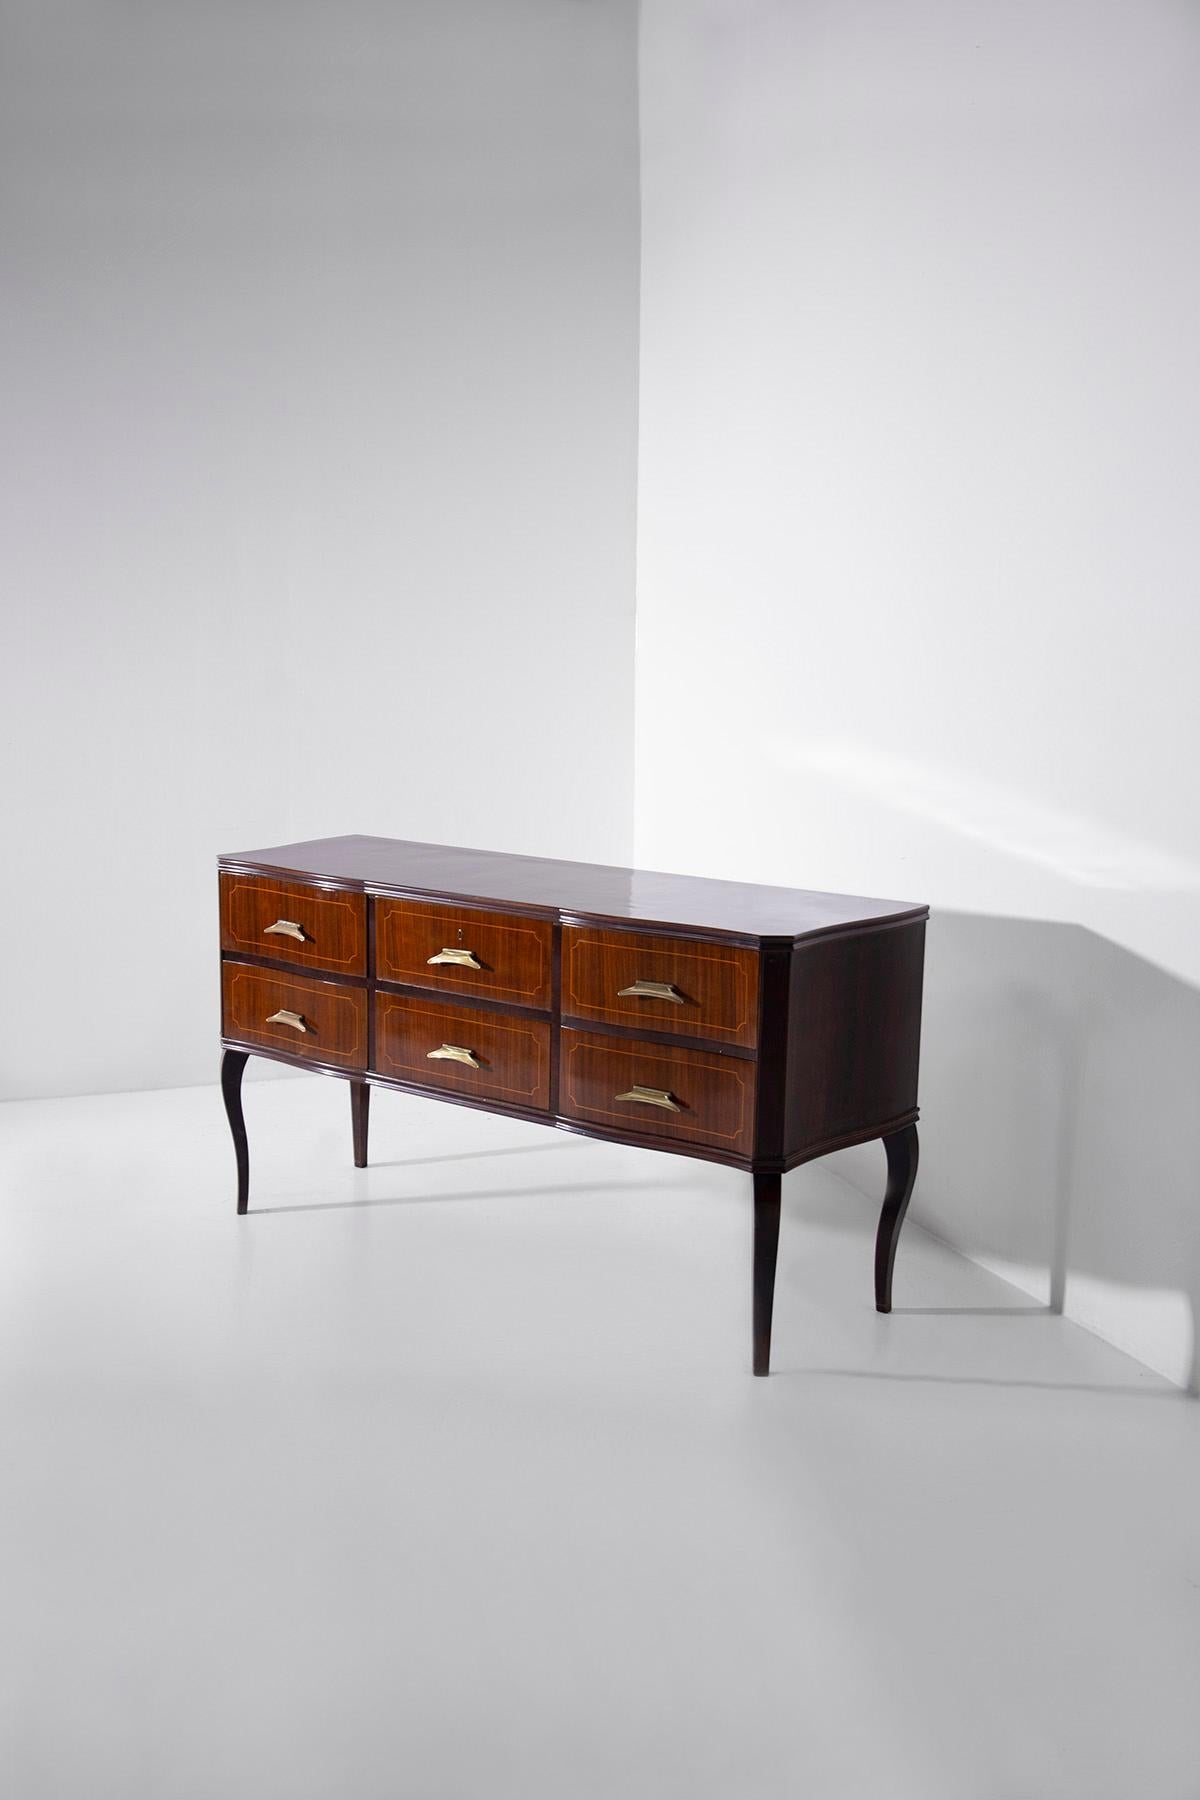 Step into the world of 1950s Italian design and discover an elegant vintage sideboard that effortlessly marries classic sophistication with modern functionality. This exquisite piece, crafted from a harmonious blend of brass and walnut wood, is a